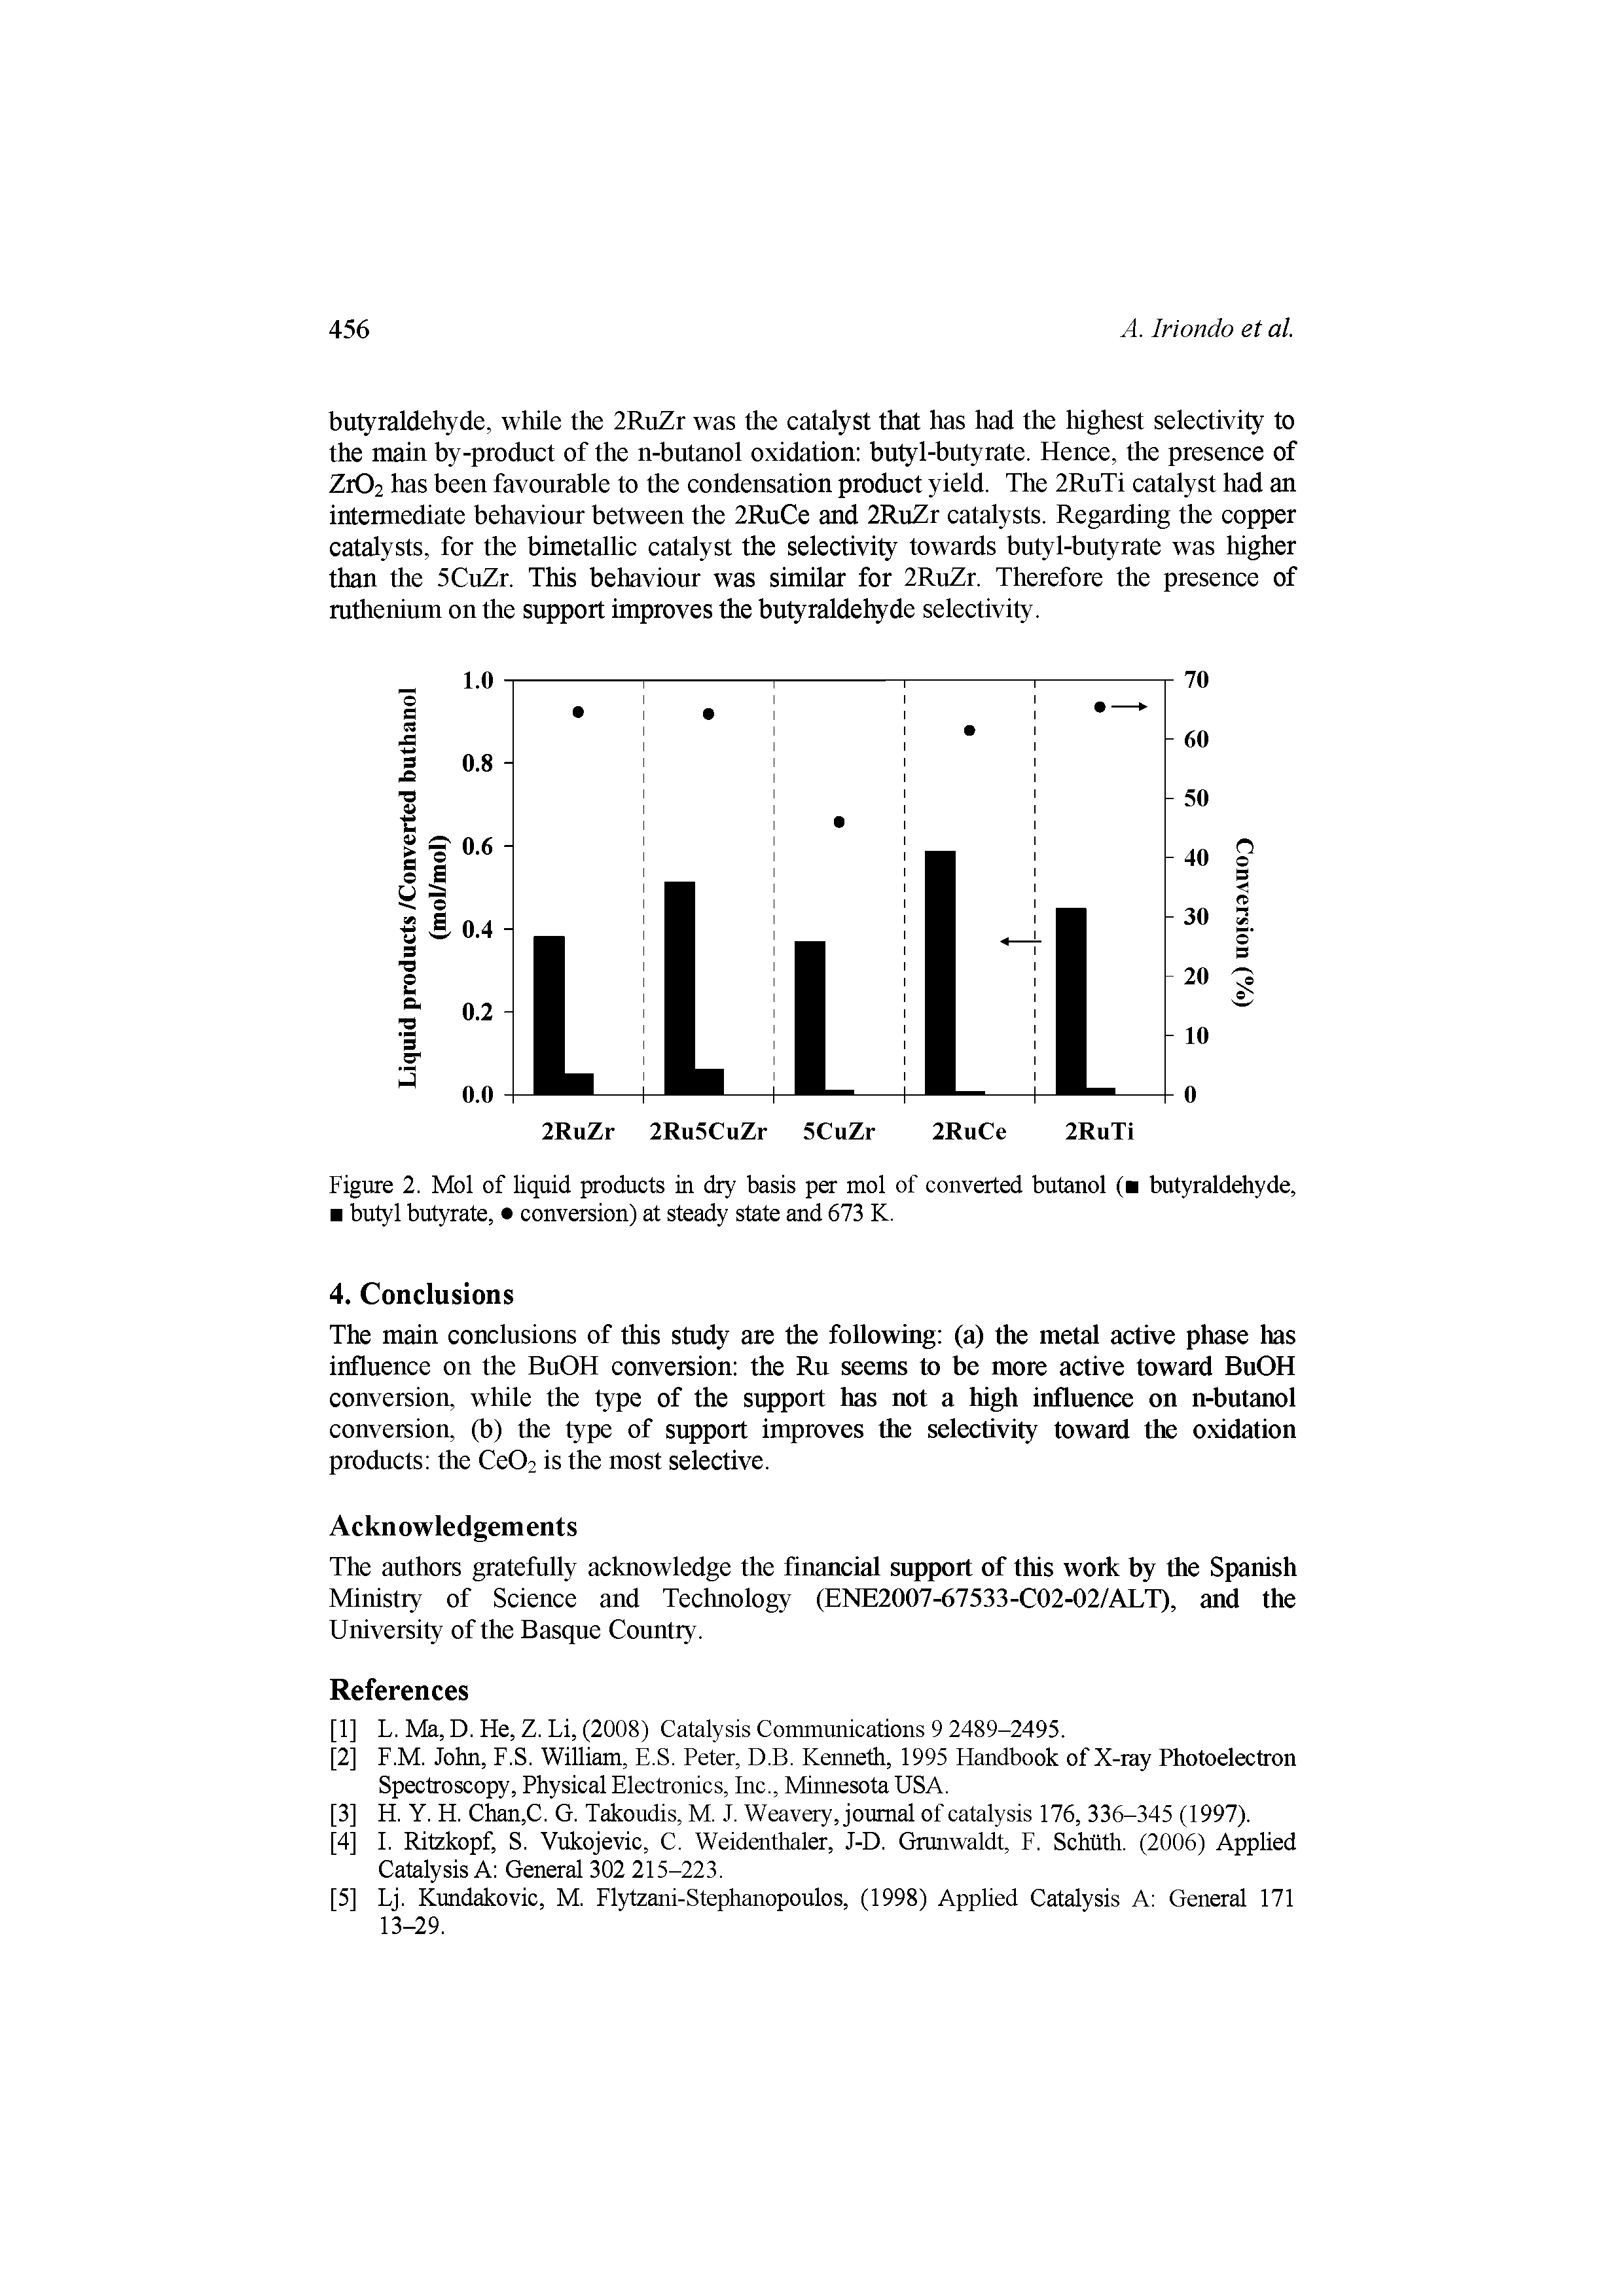 Figure 2. Mol of liquid products in dry basis per mol of converted butanol ( butyraldehyde, butyl butyrate, conversion) at steady state and 673 K.